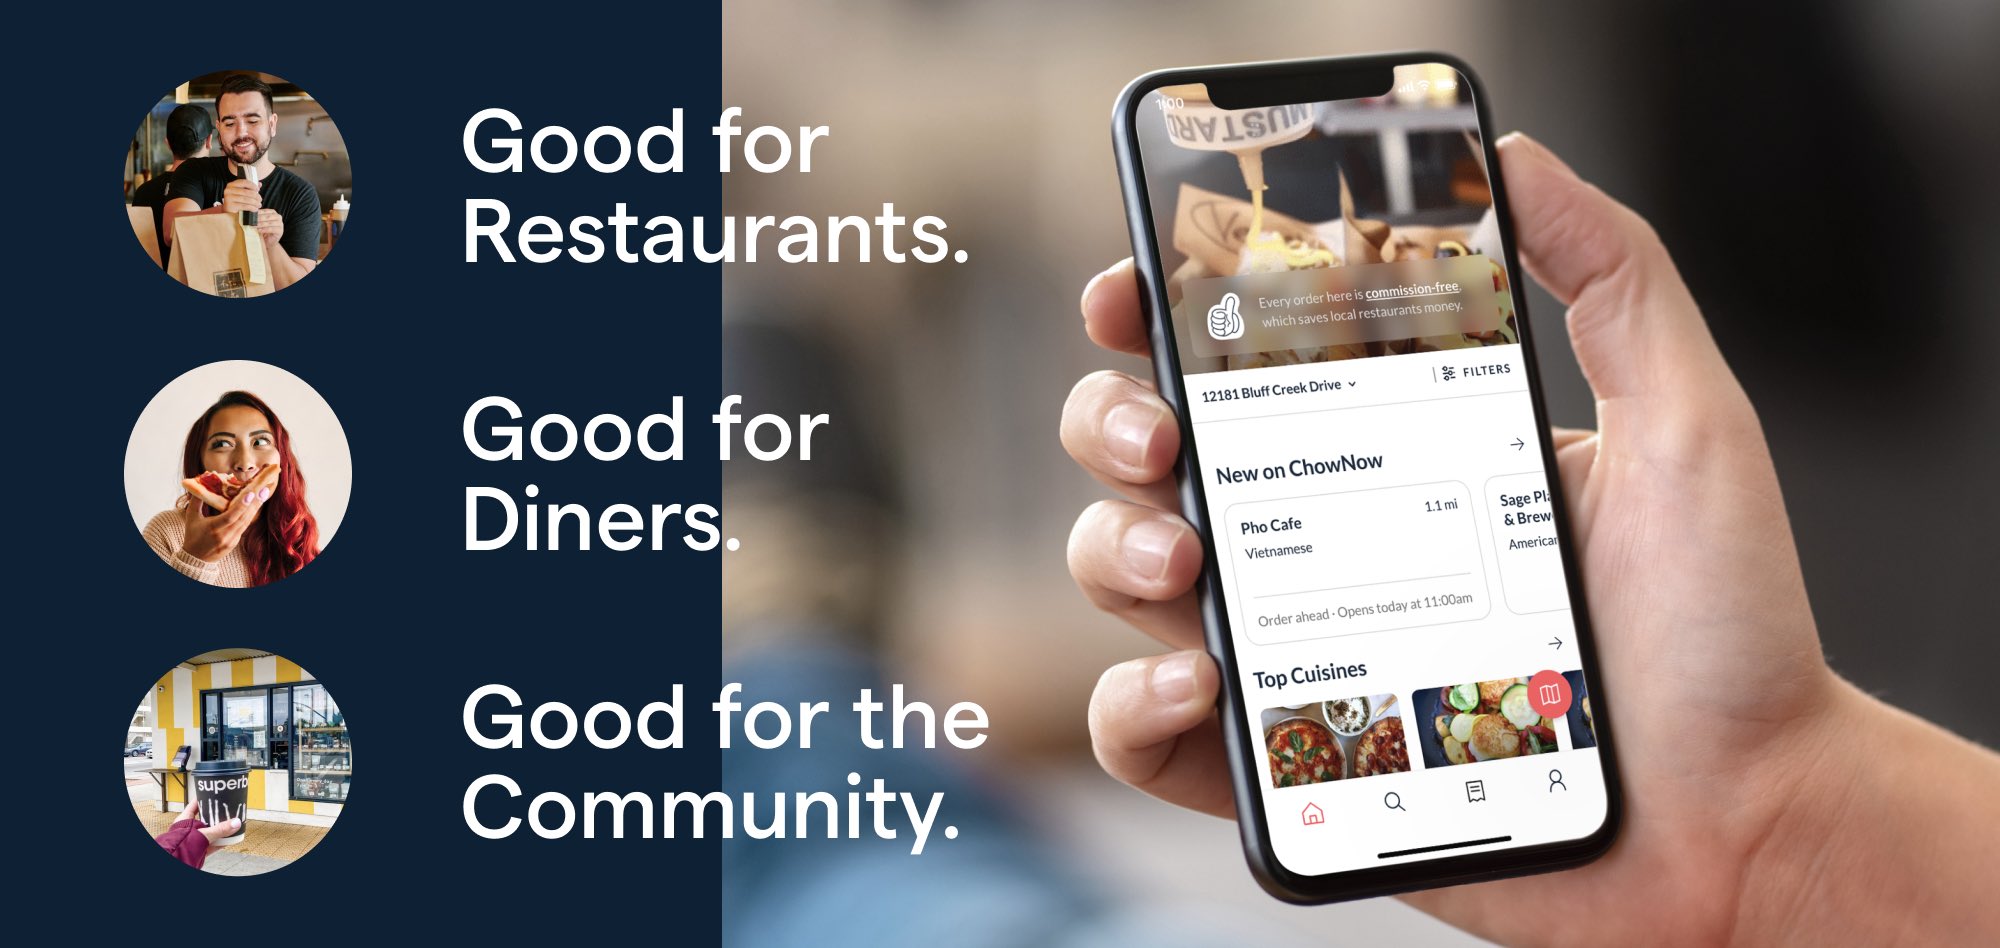 The ChowNow Marketplace is good for restaurants, diners, and their communities.